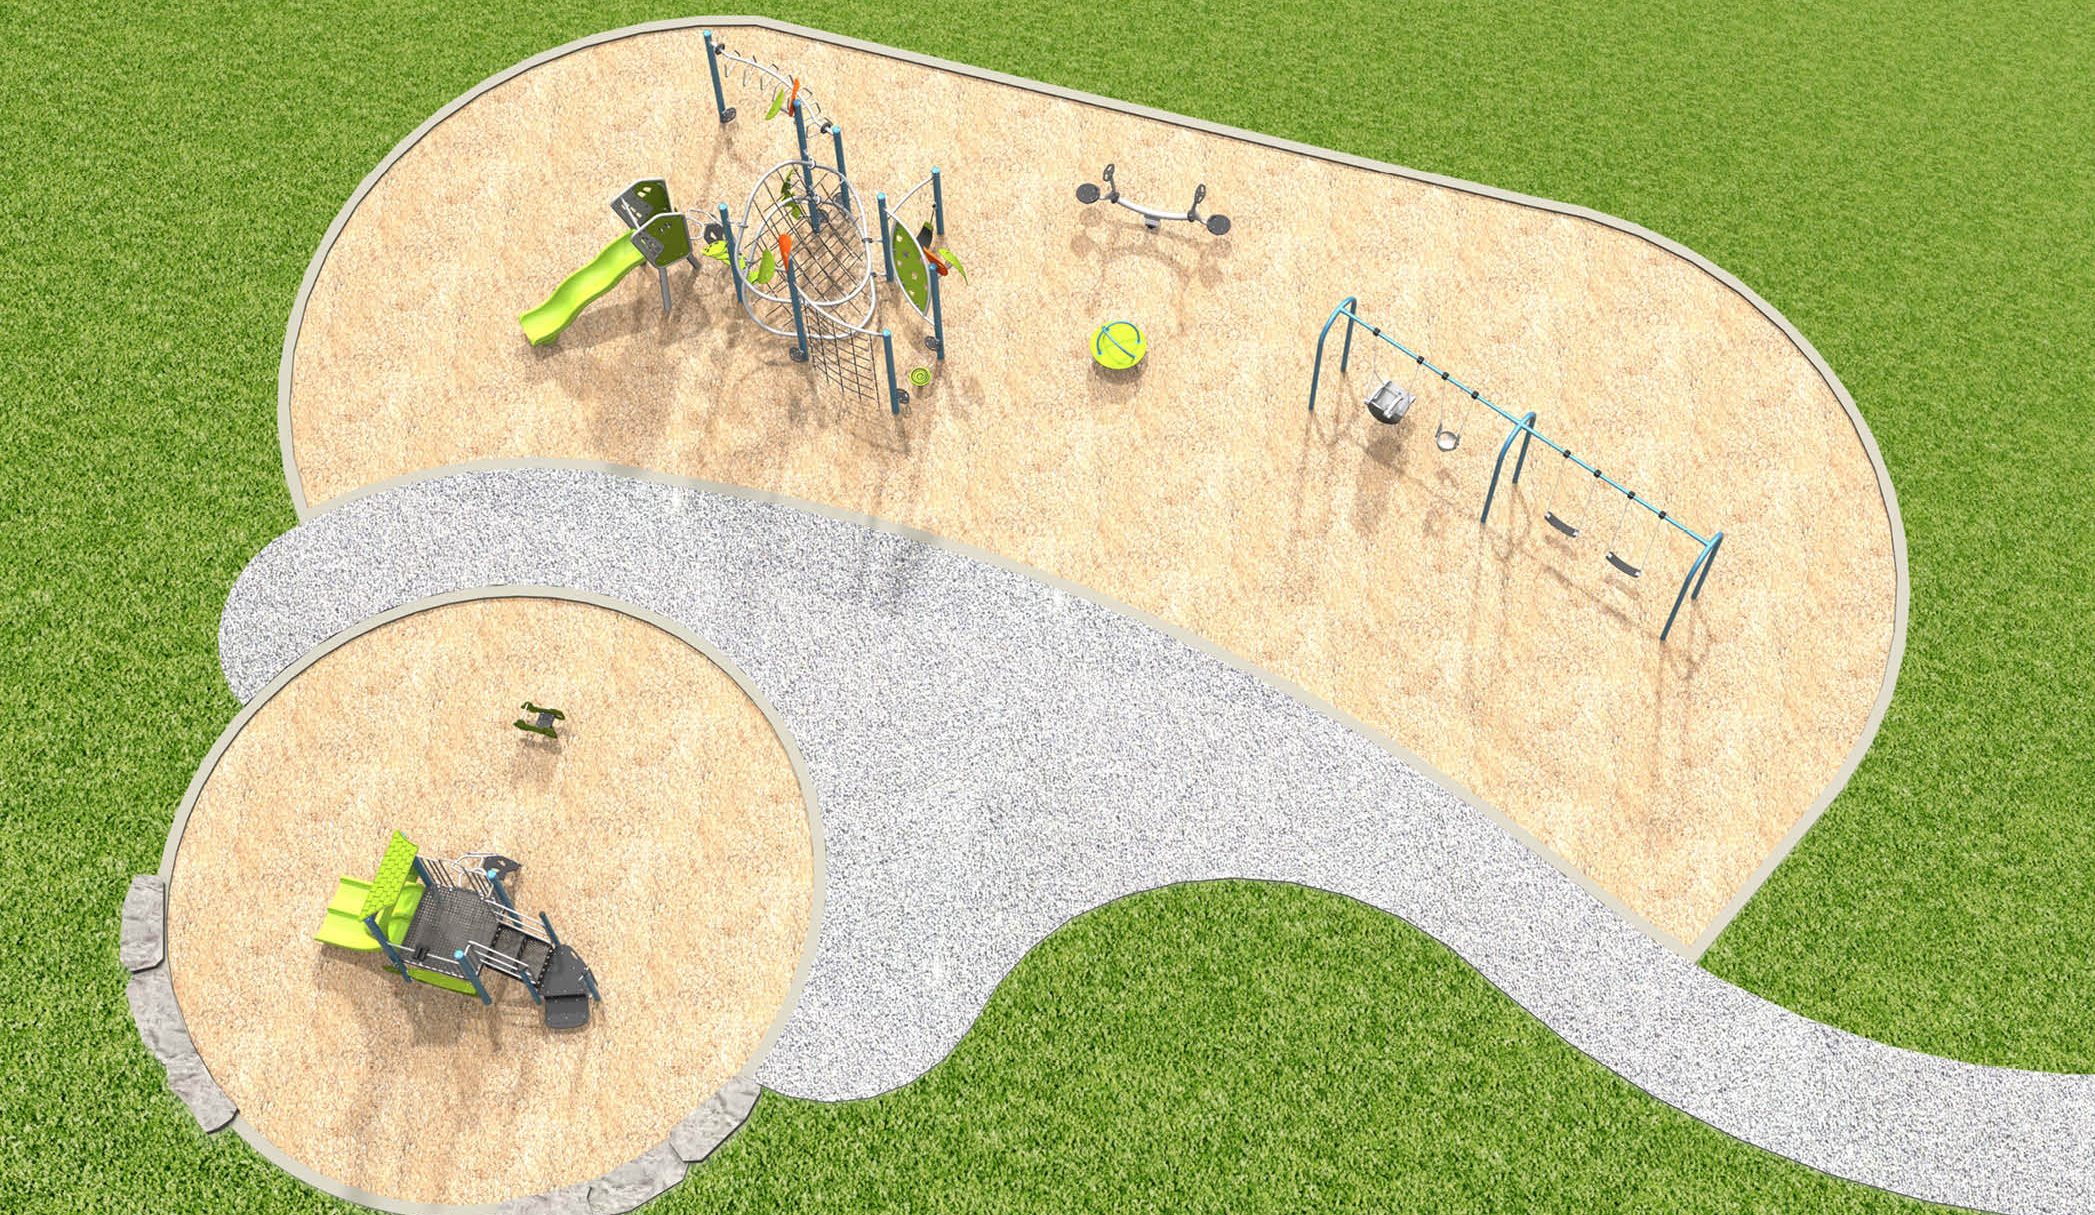 The final design for the new Elkhorn Park Playground, which has been refined based on community feedback. It will be (silver blue and lime green) and include the play features listed below.